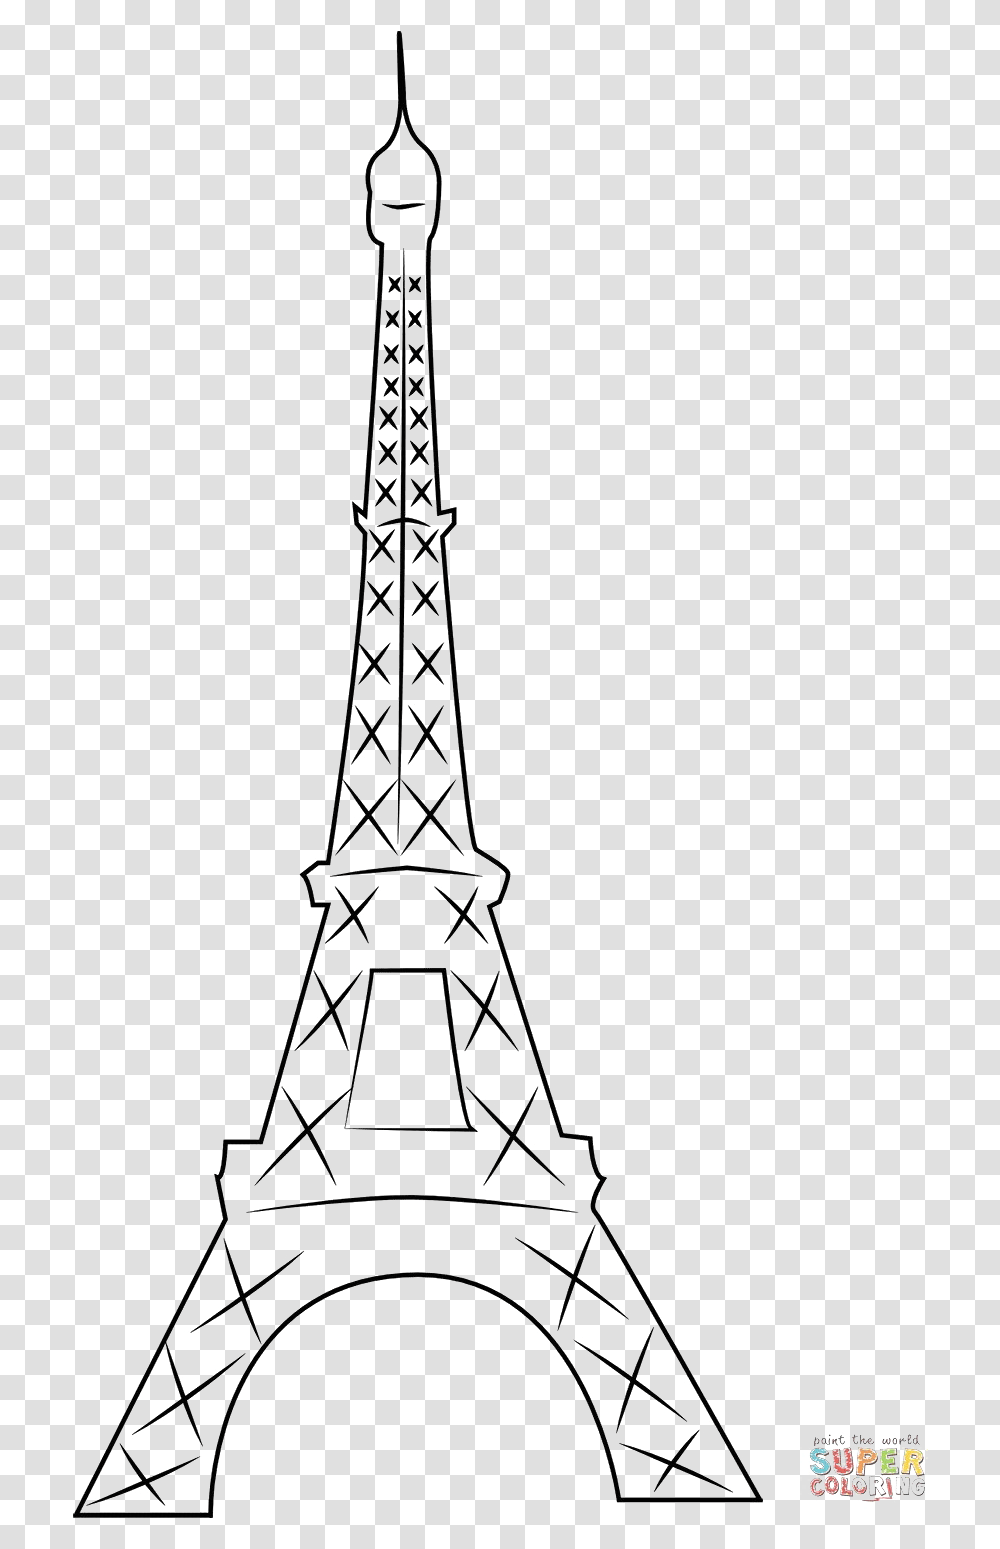 Eiffel Tower Silhouette Pic Eiffel Tower Outline, Architecture, Building, Spire, Steeple Transparent Png